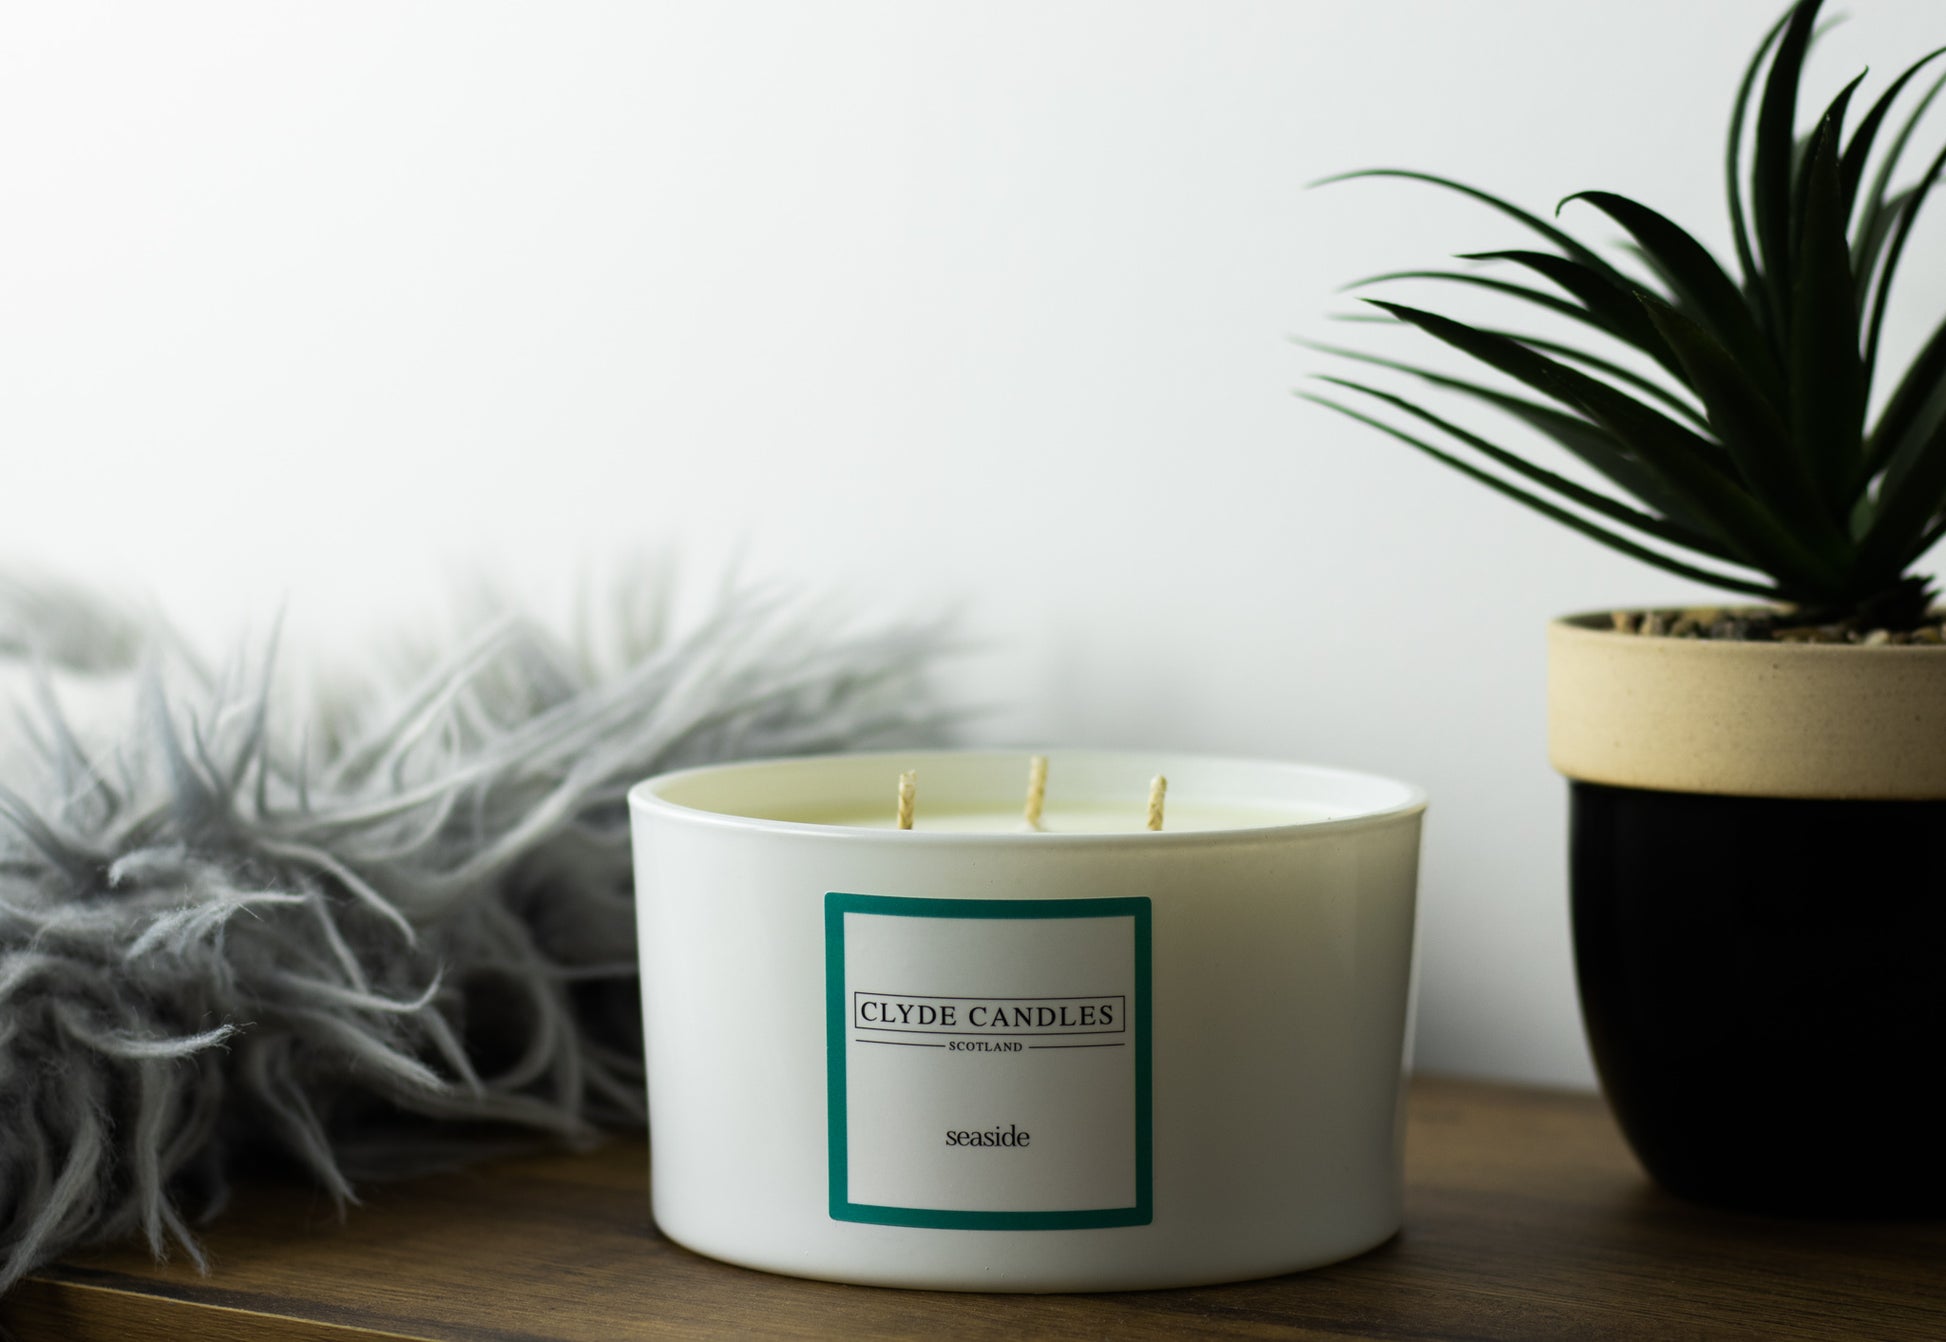 seaside three wicks natural soy wax clyde candles, scottish made luxury gifts, sea salt algae